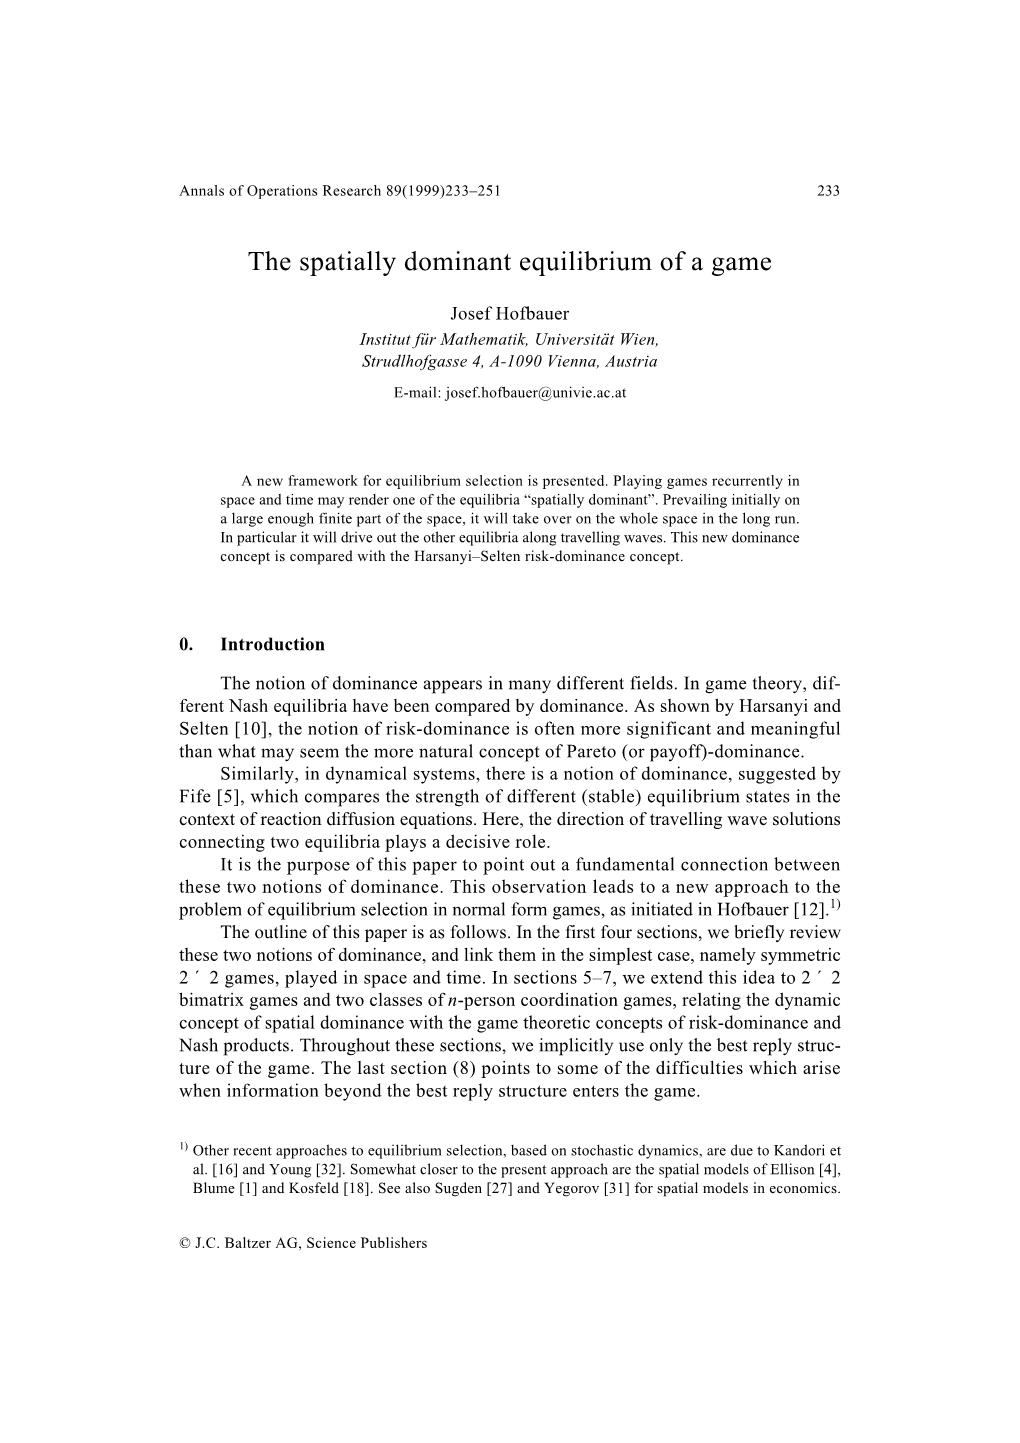 The Spatially Dominant Equilibrium of a Game